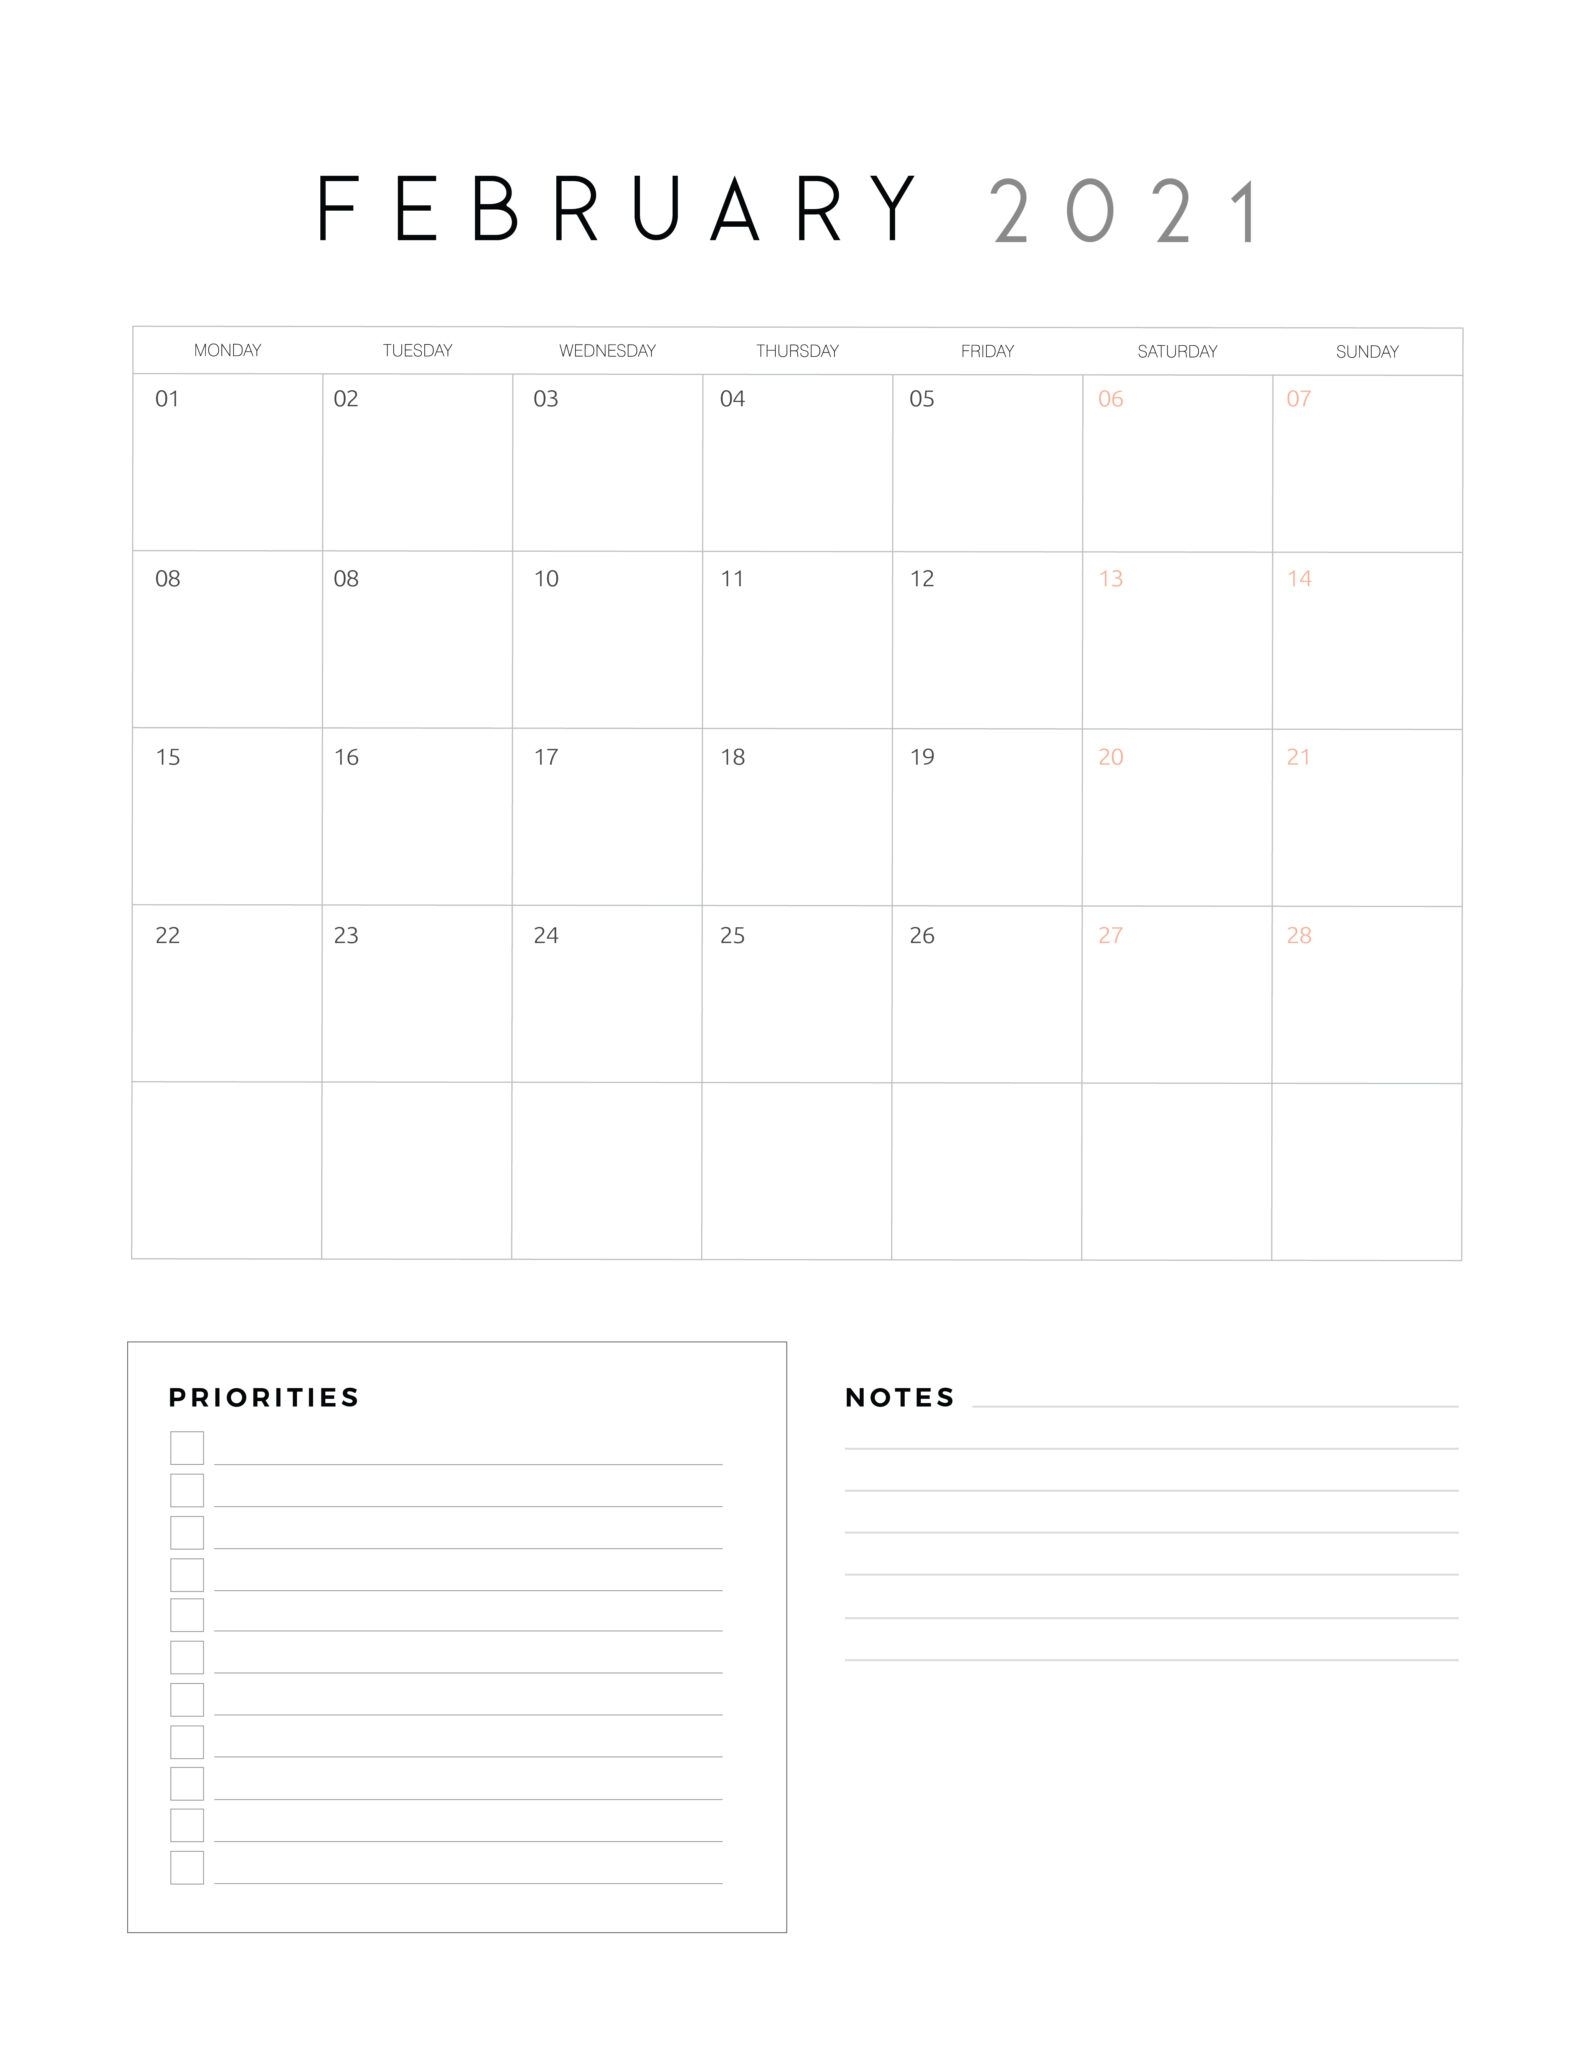 2021 Calendar With Priorities And Notes - World Of